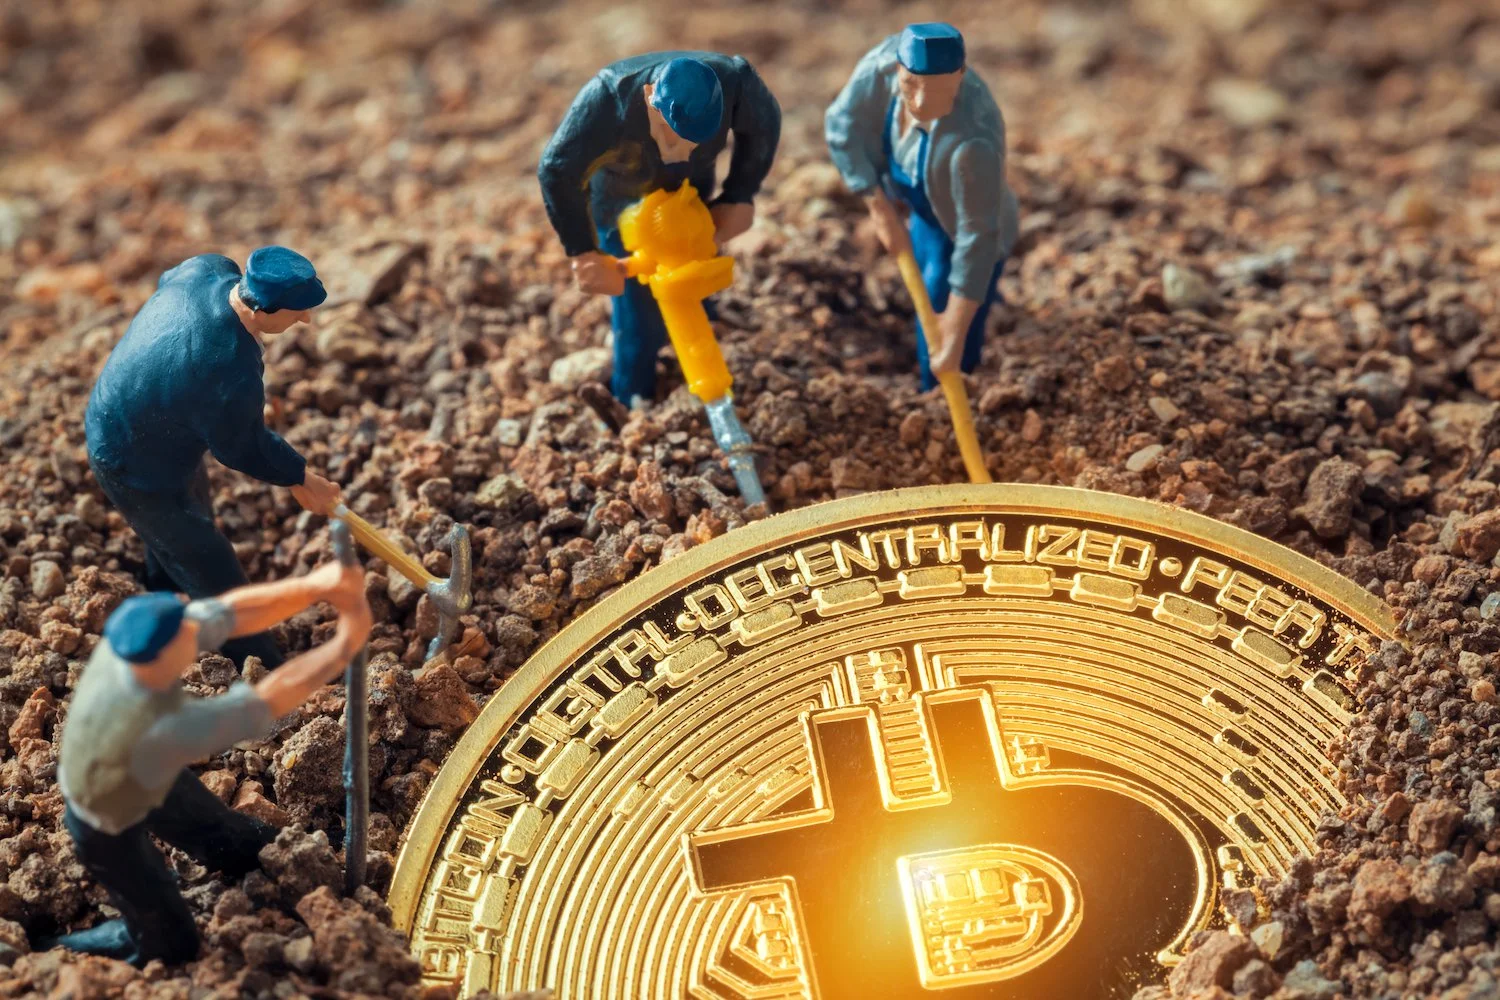 Bitcoin mining has become more difficult and energy-intensive